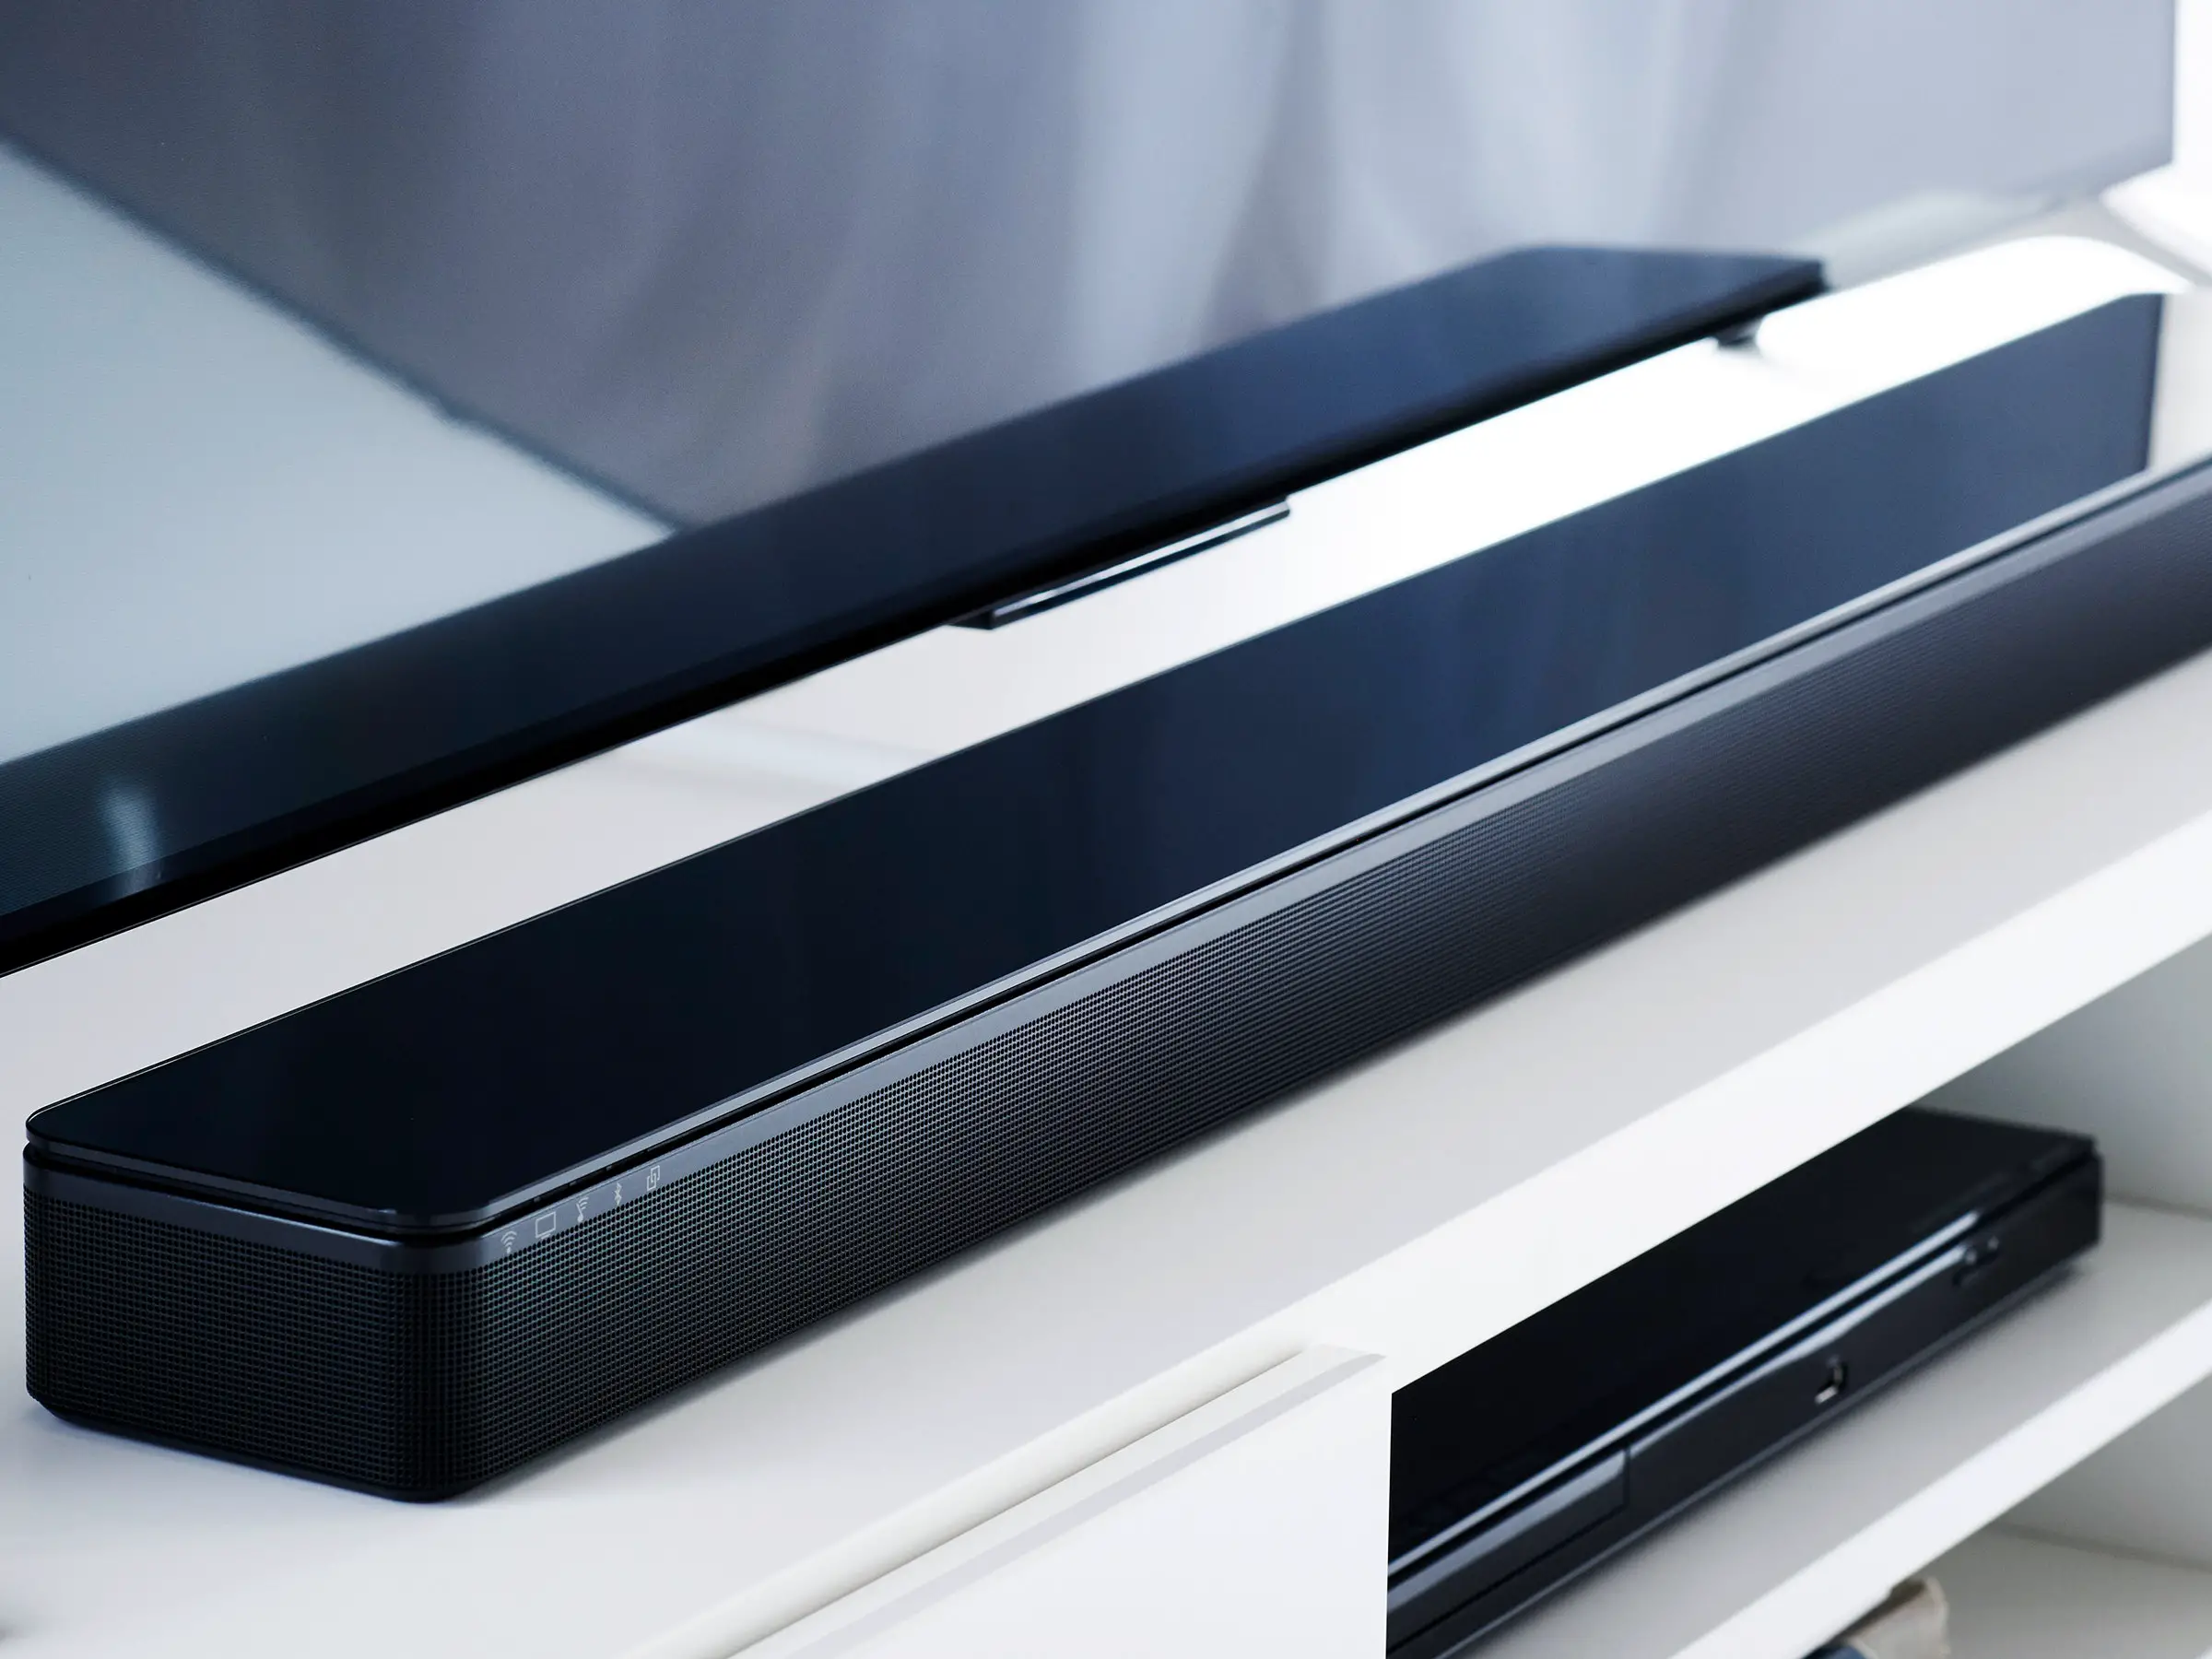 Bose Soundtouch 300 Vs. Sonos Playbar: Which Should You Choose?